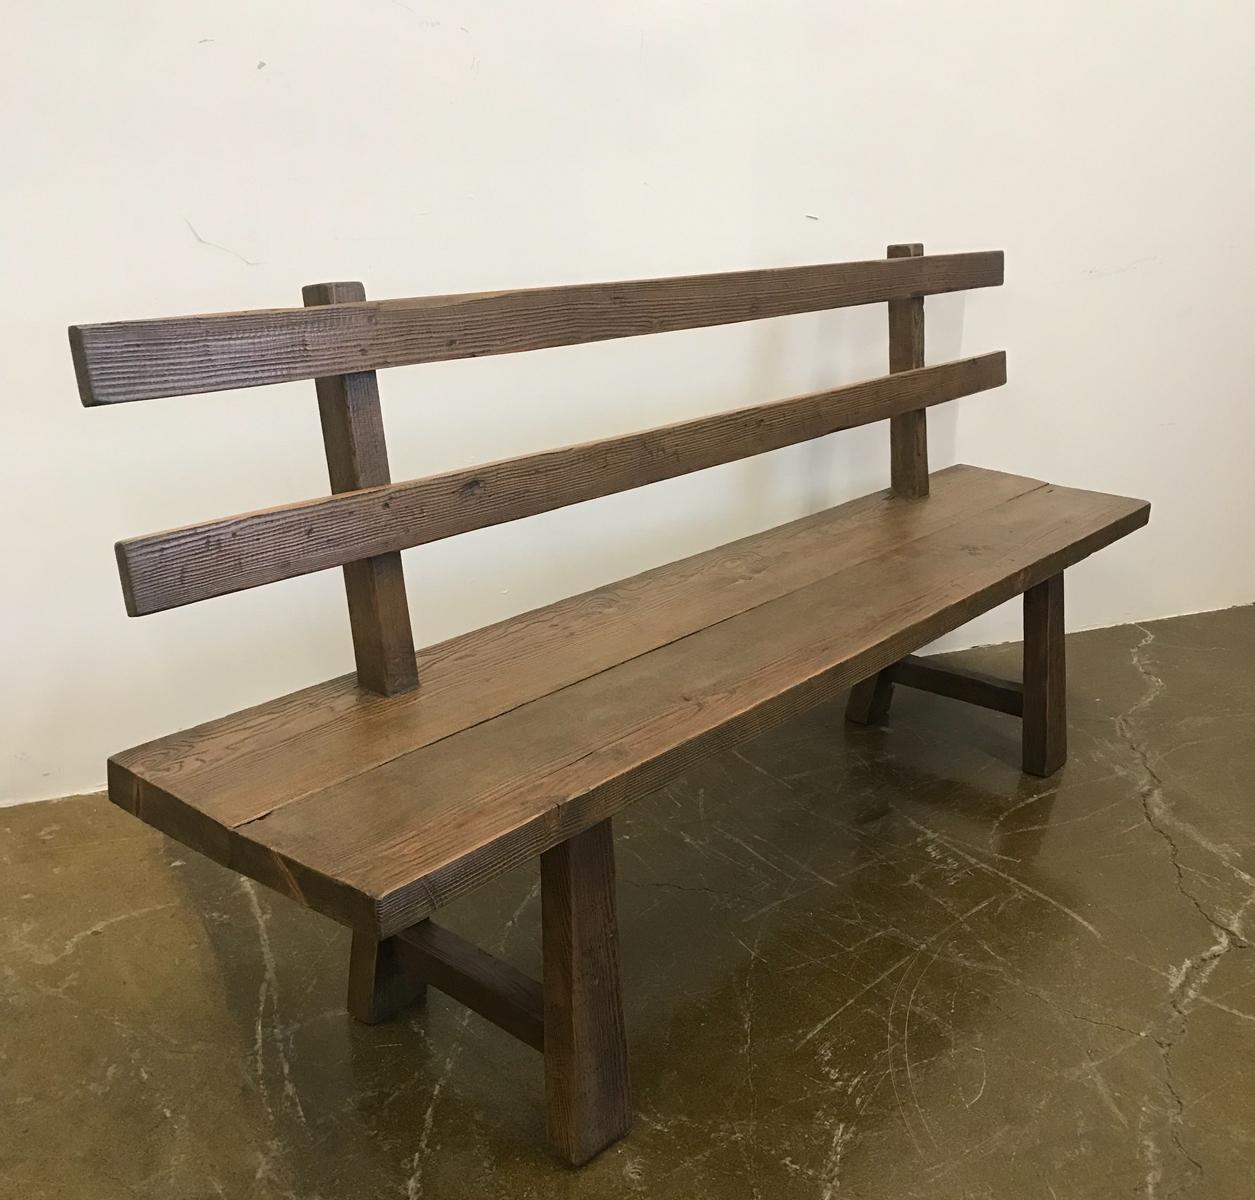 Narrow bench made from reclaimed Douglas fir. Slatted black. Seat depth is 12.5, a perfect bench for a hallway or entry. Natural distress of reclaimed wood. Sturdy!